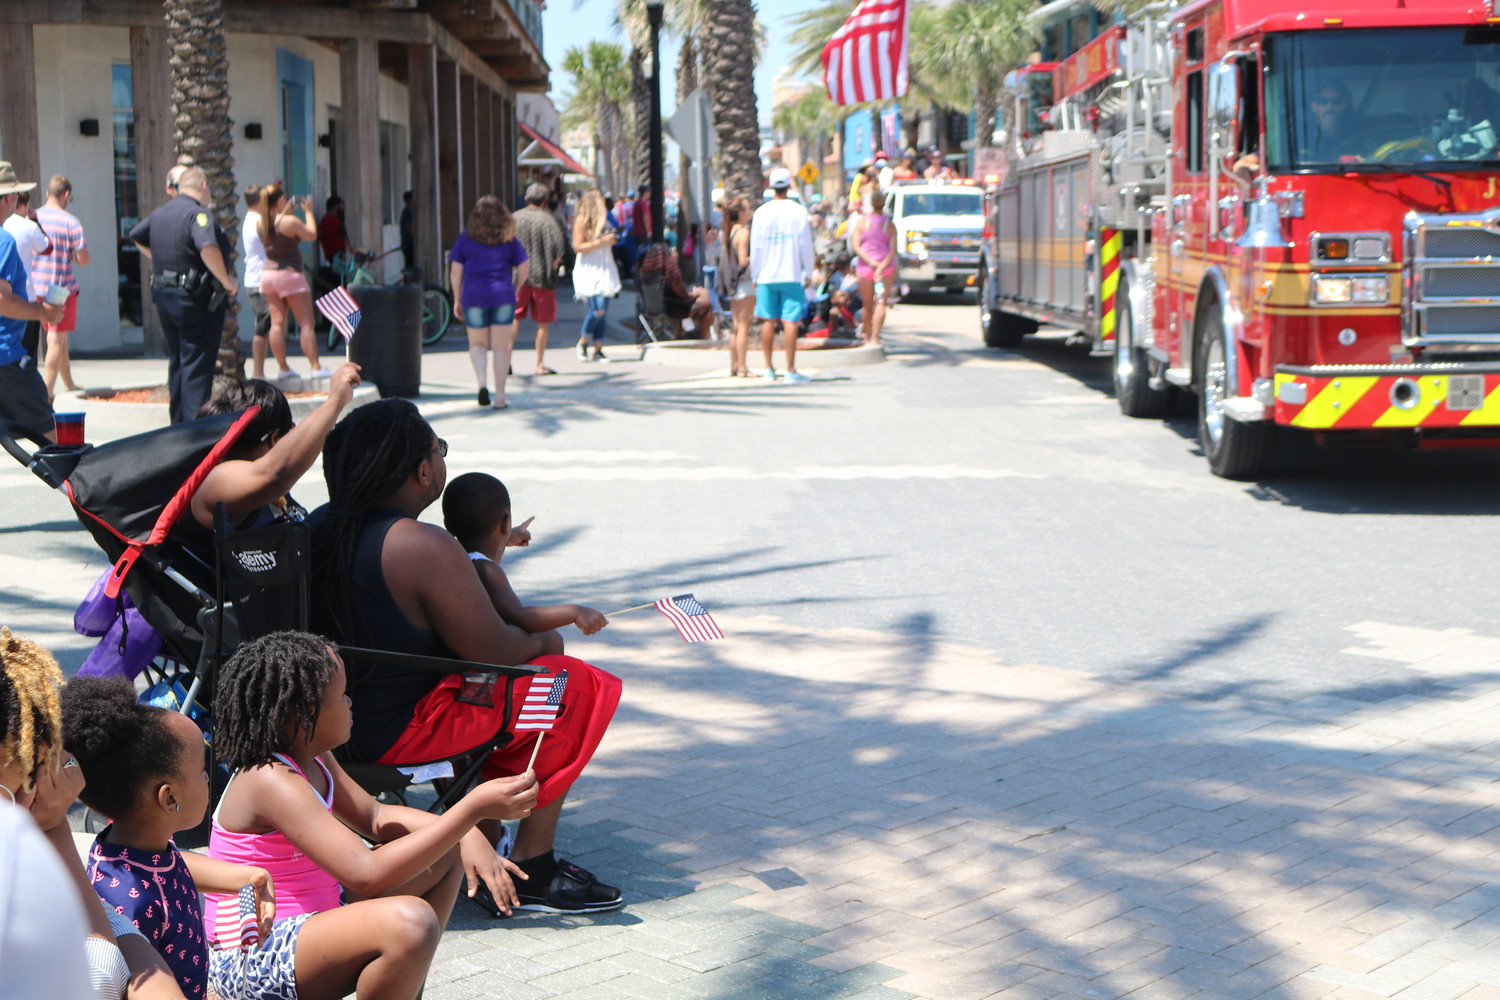 A family of parade-goers waves American flags as they intently watch the parade.